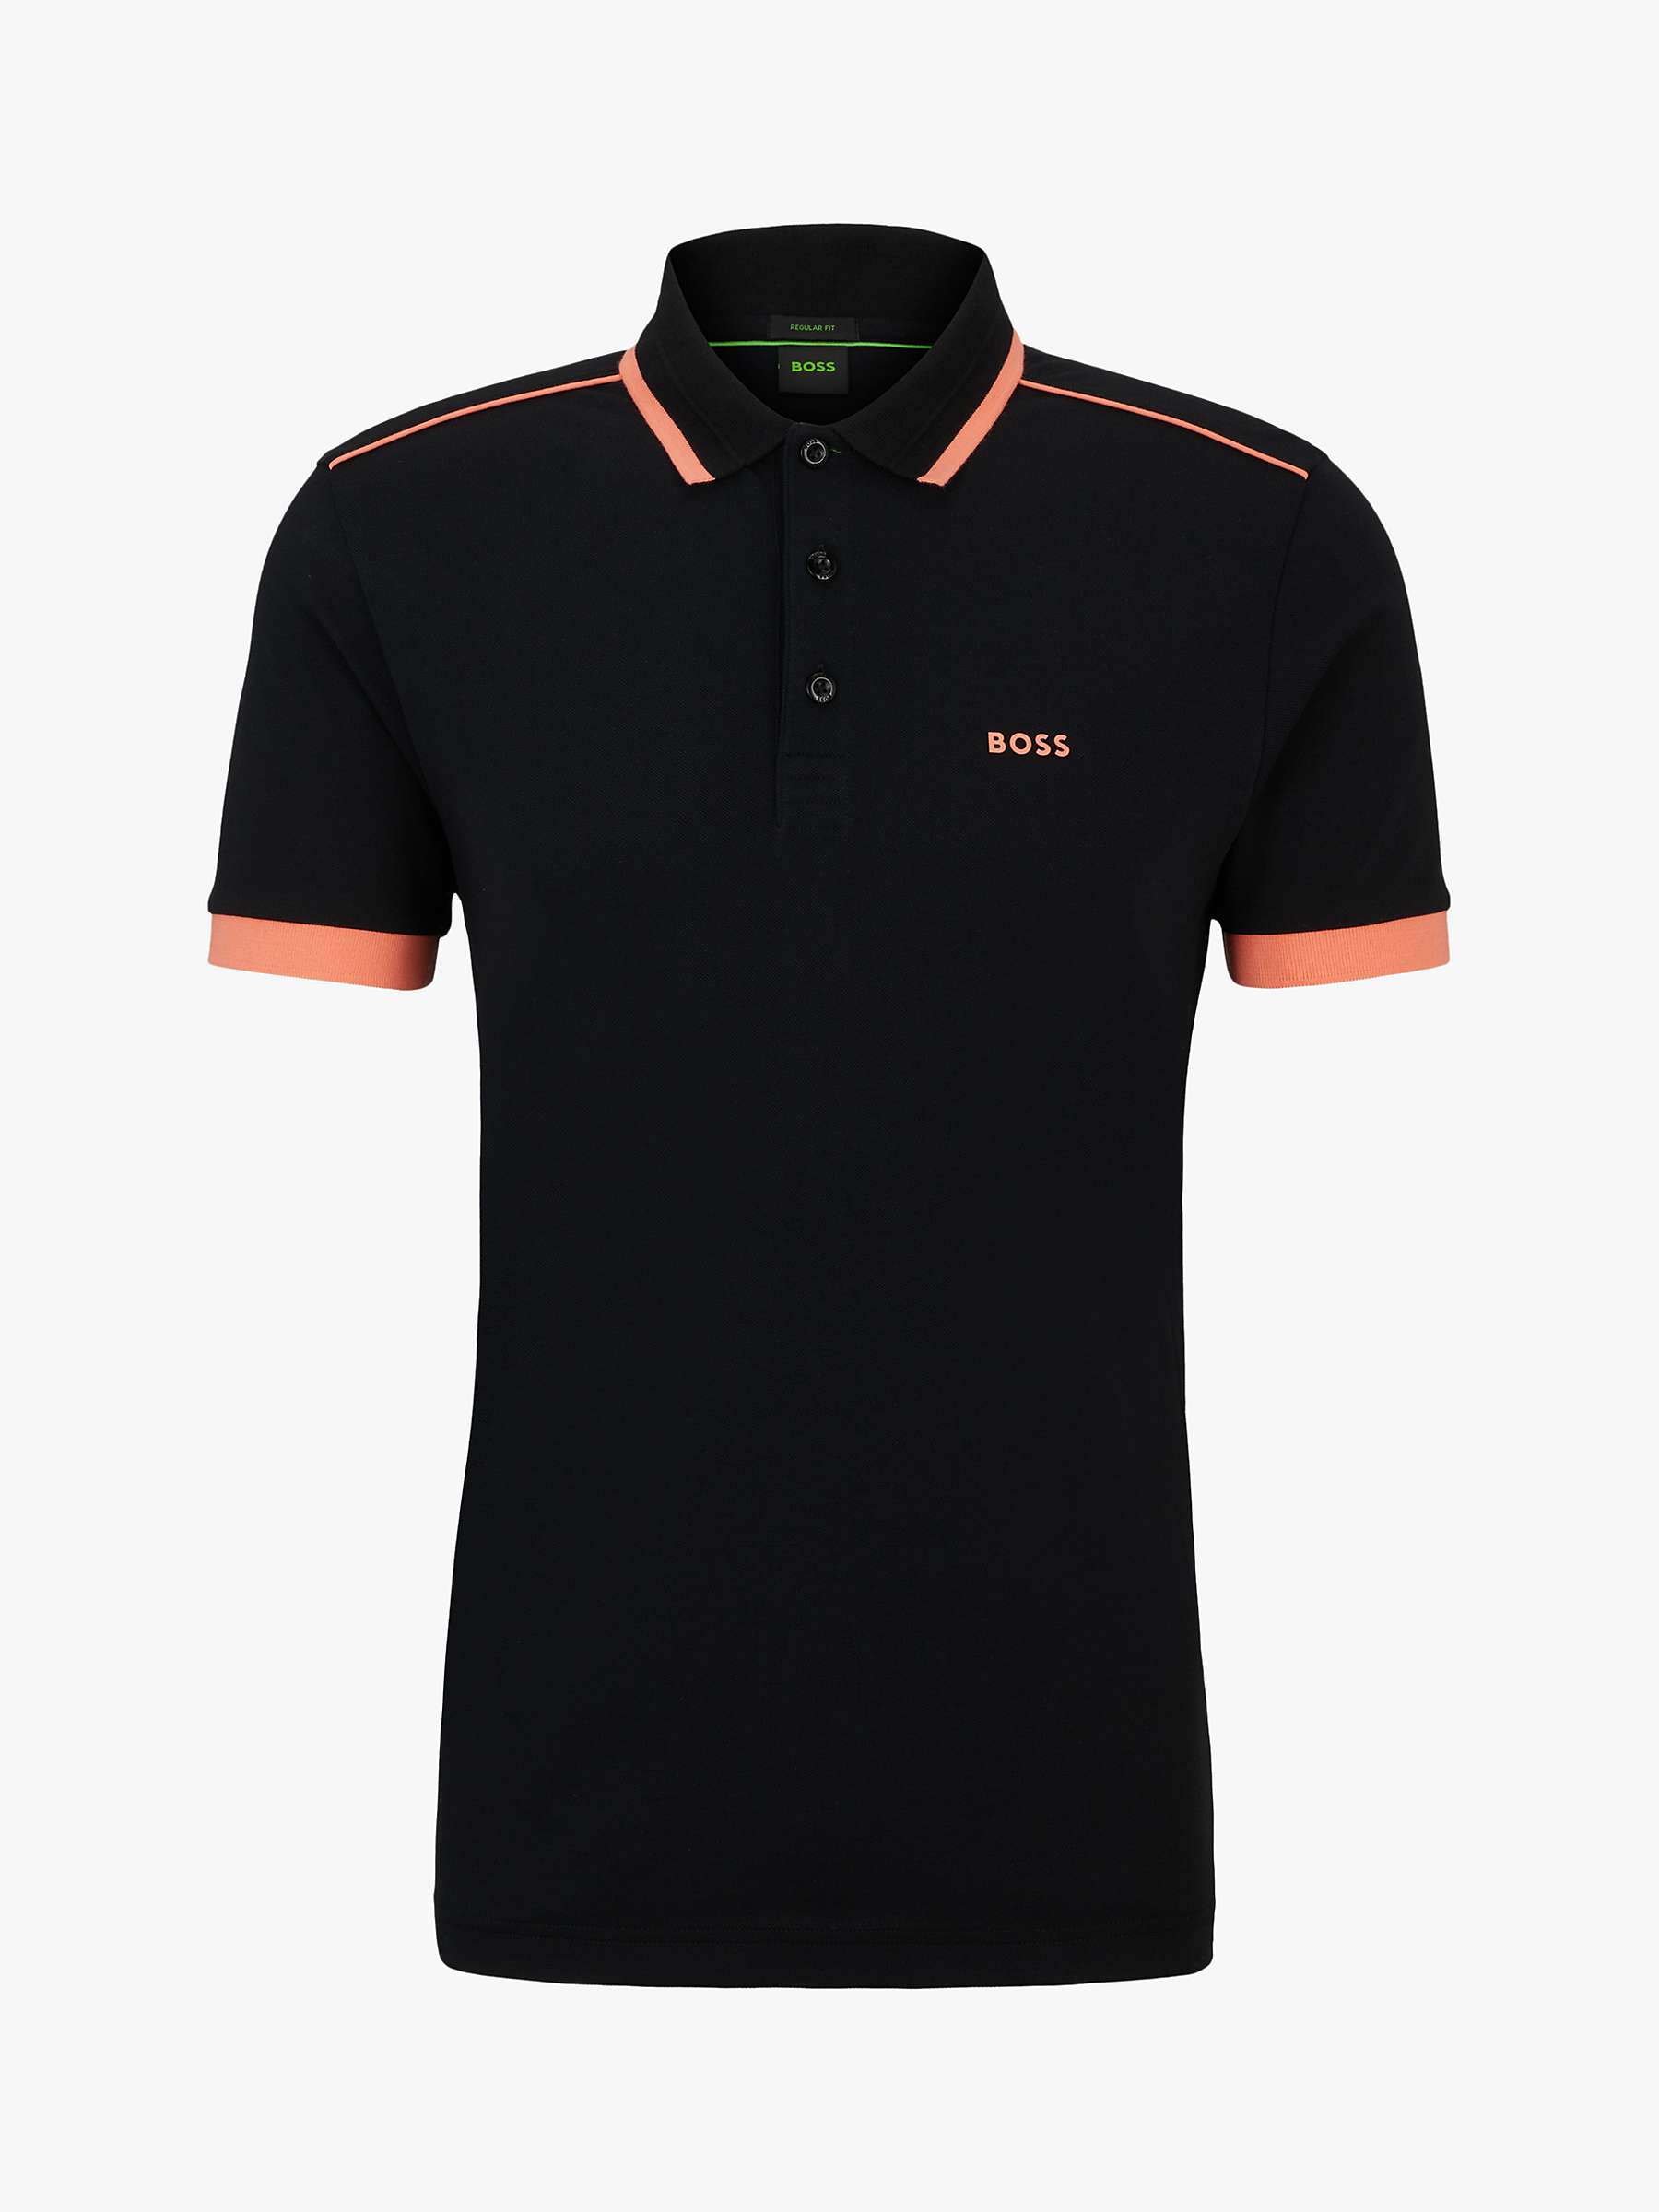 Buy BOSS Paddy Sporty Polo Shirt, Black Online at johnlewis.com